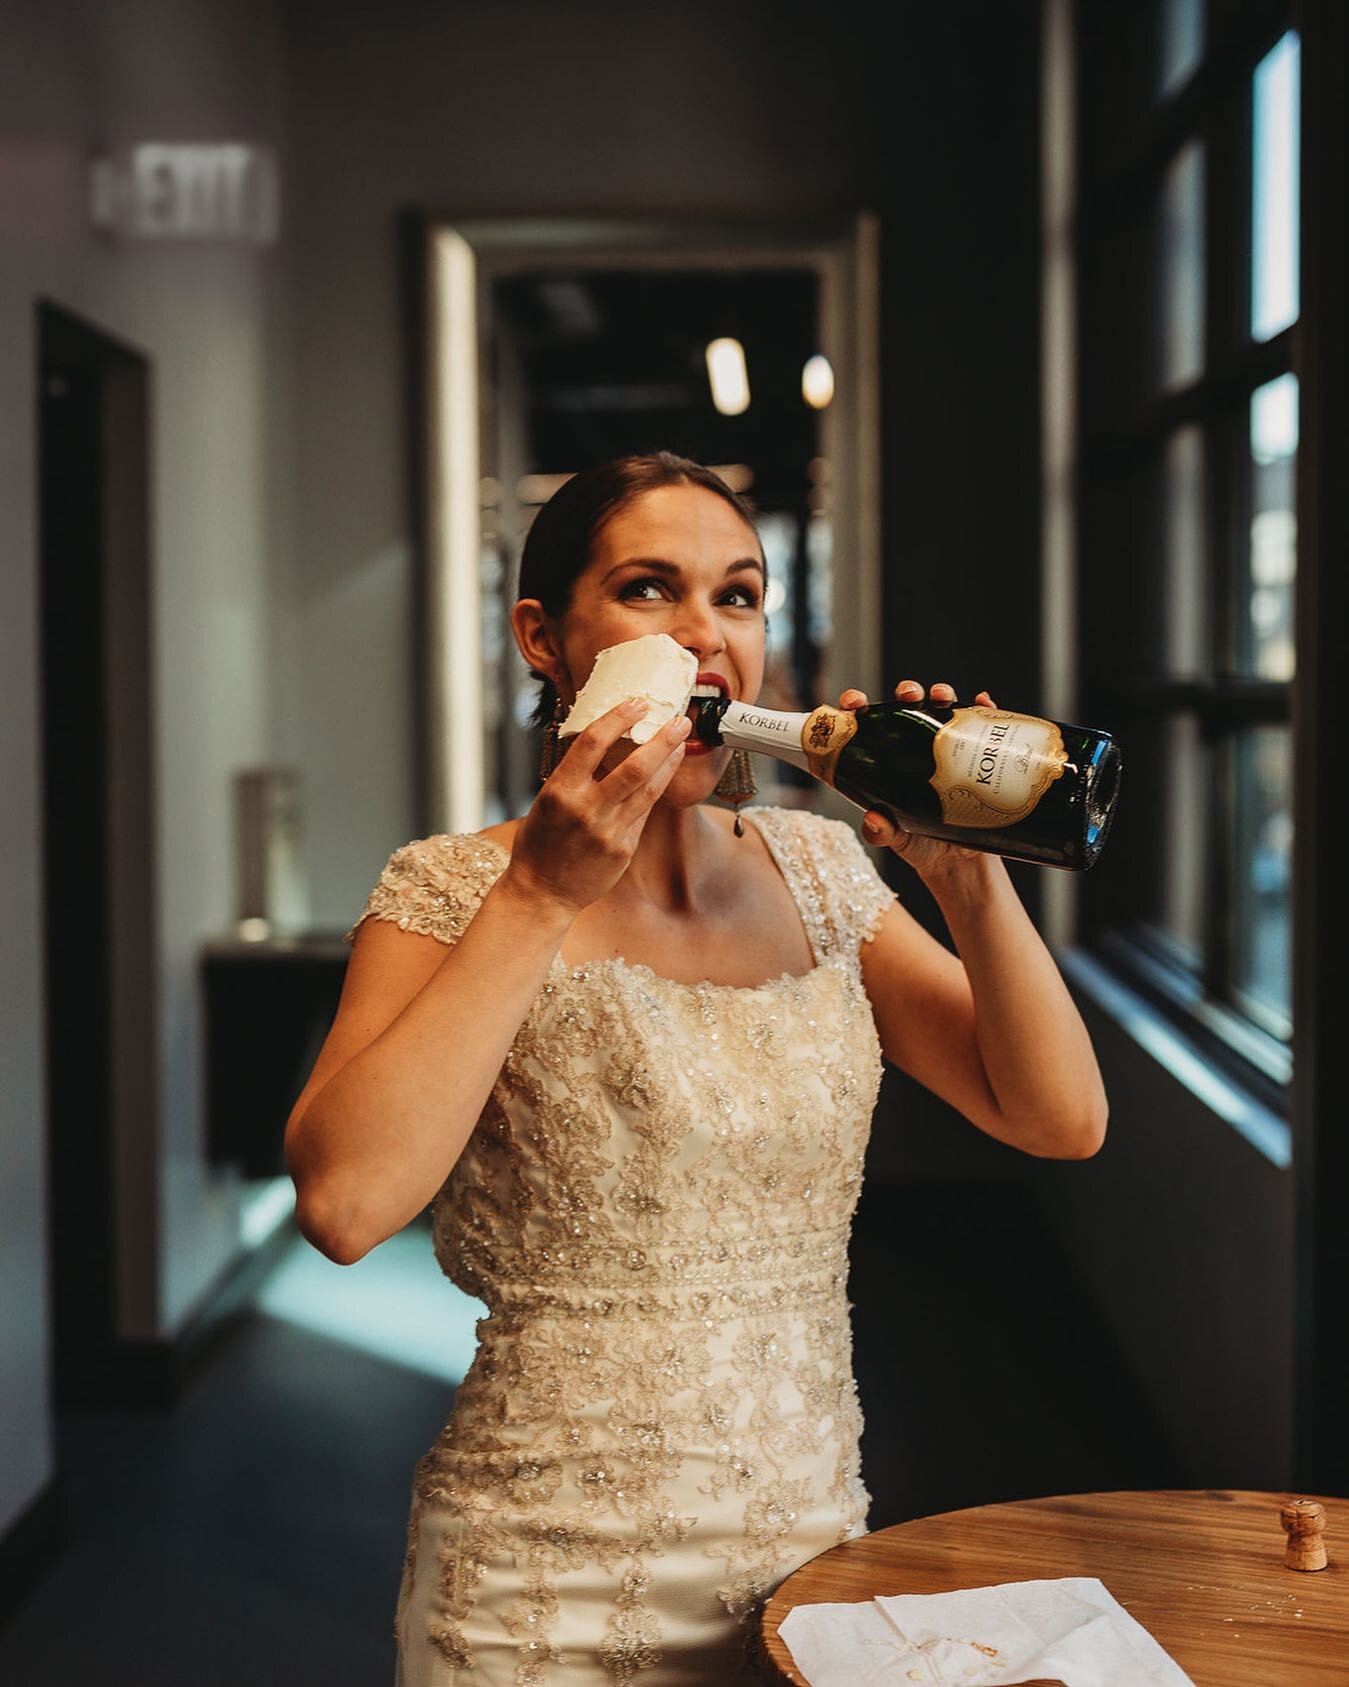 🍾🍰 Is there any other way to celebrate your anniversary than to wear your original wedding dress while eating gourmet cake + champagne? We think not! 🖤
&bull;
&bull;
&bull;
#austinvenue #atx #weddingcake #champagne #photoshoot